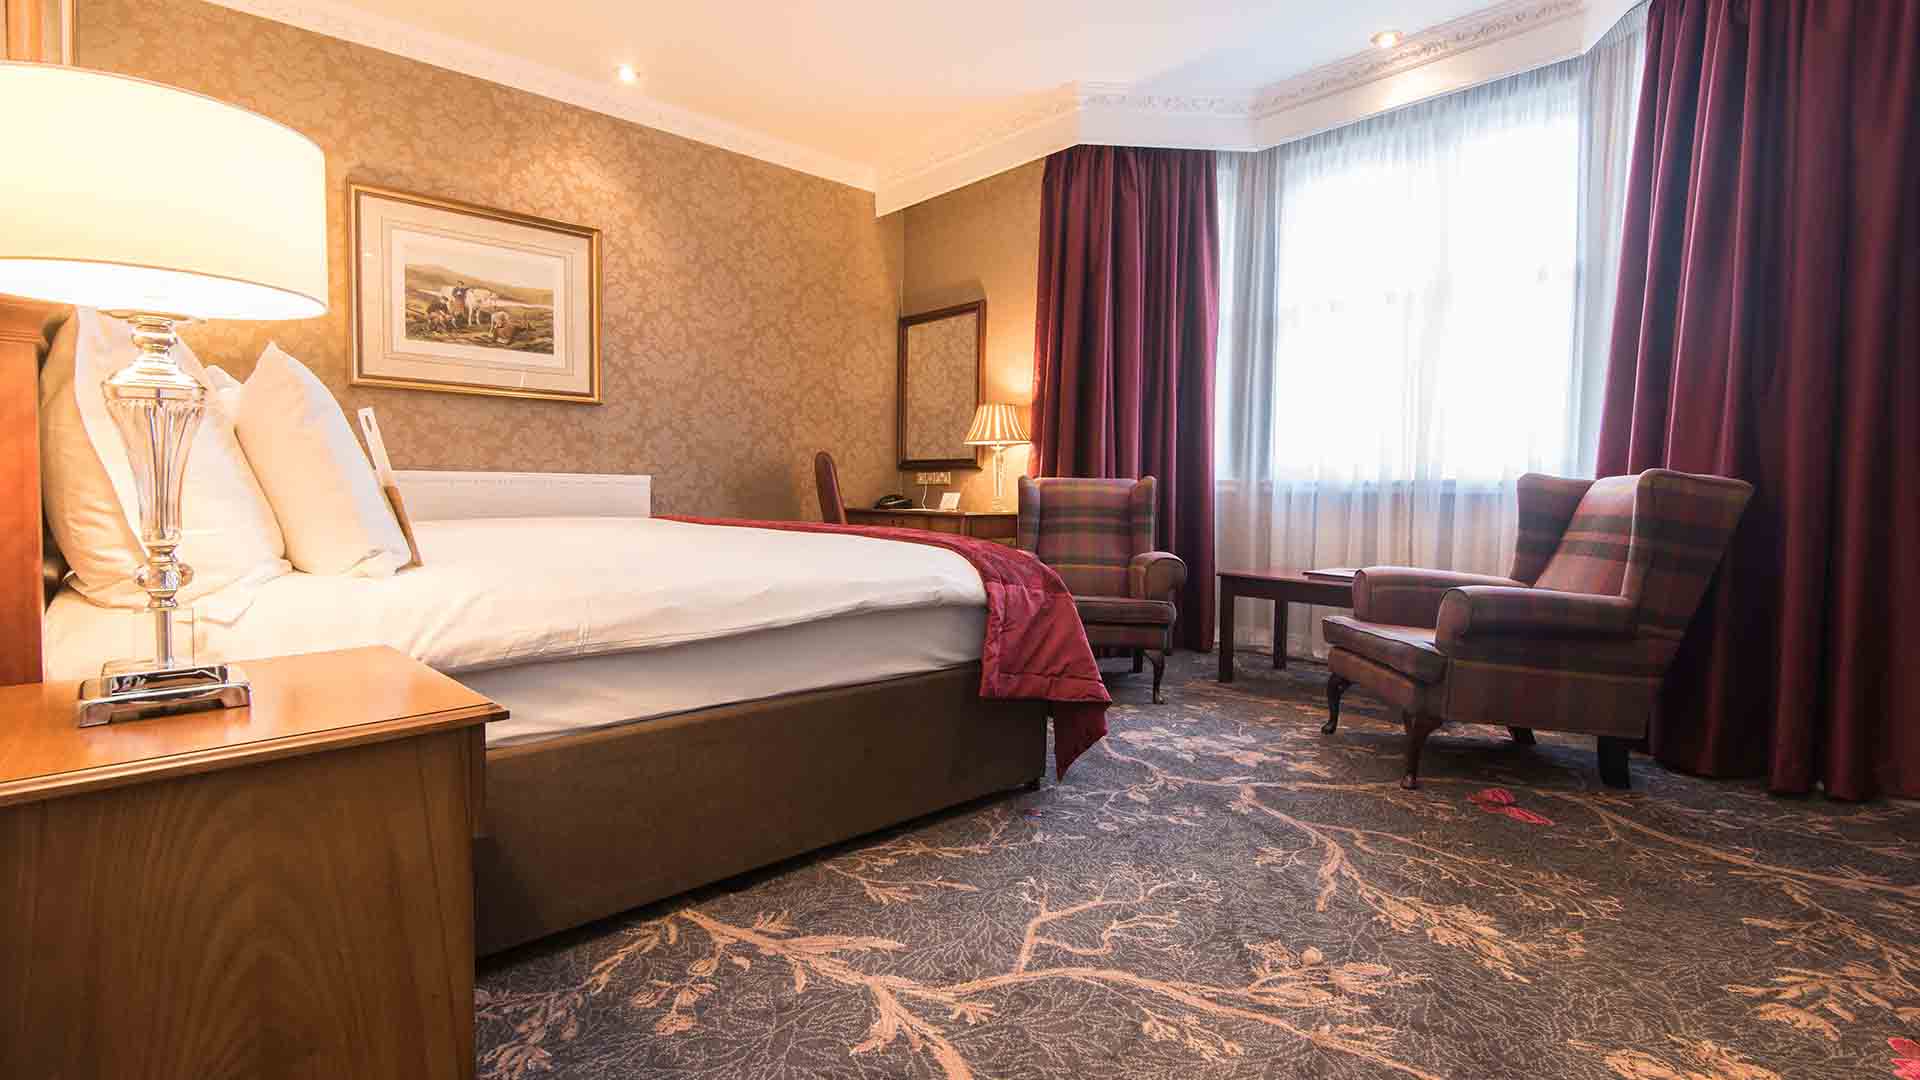 Classic Room Accommodation in Scotland | Kingsmills Hotel